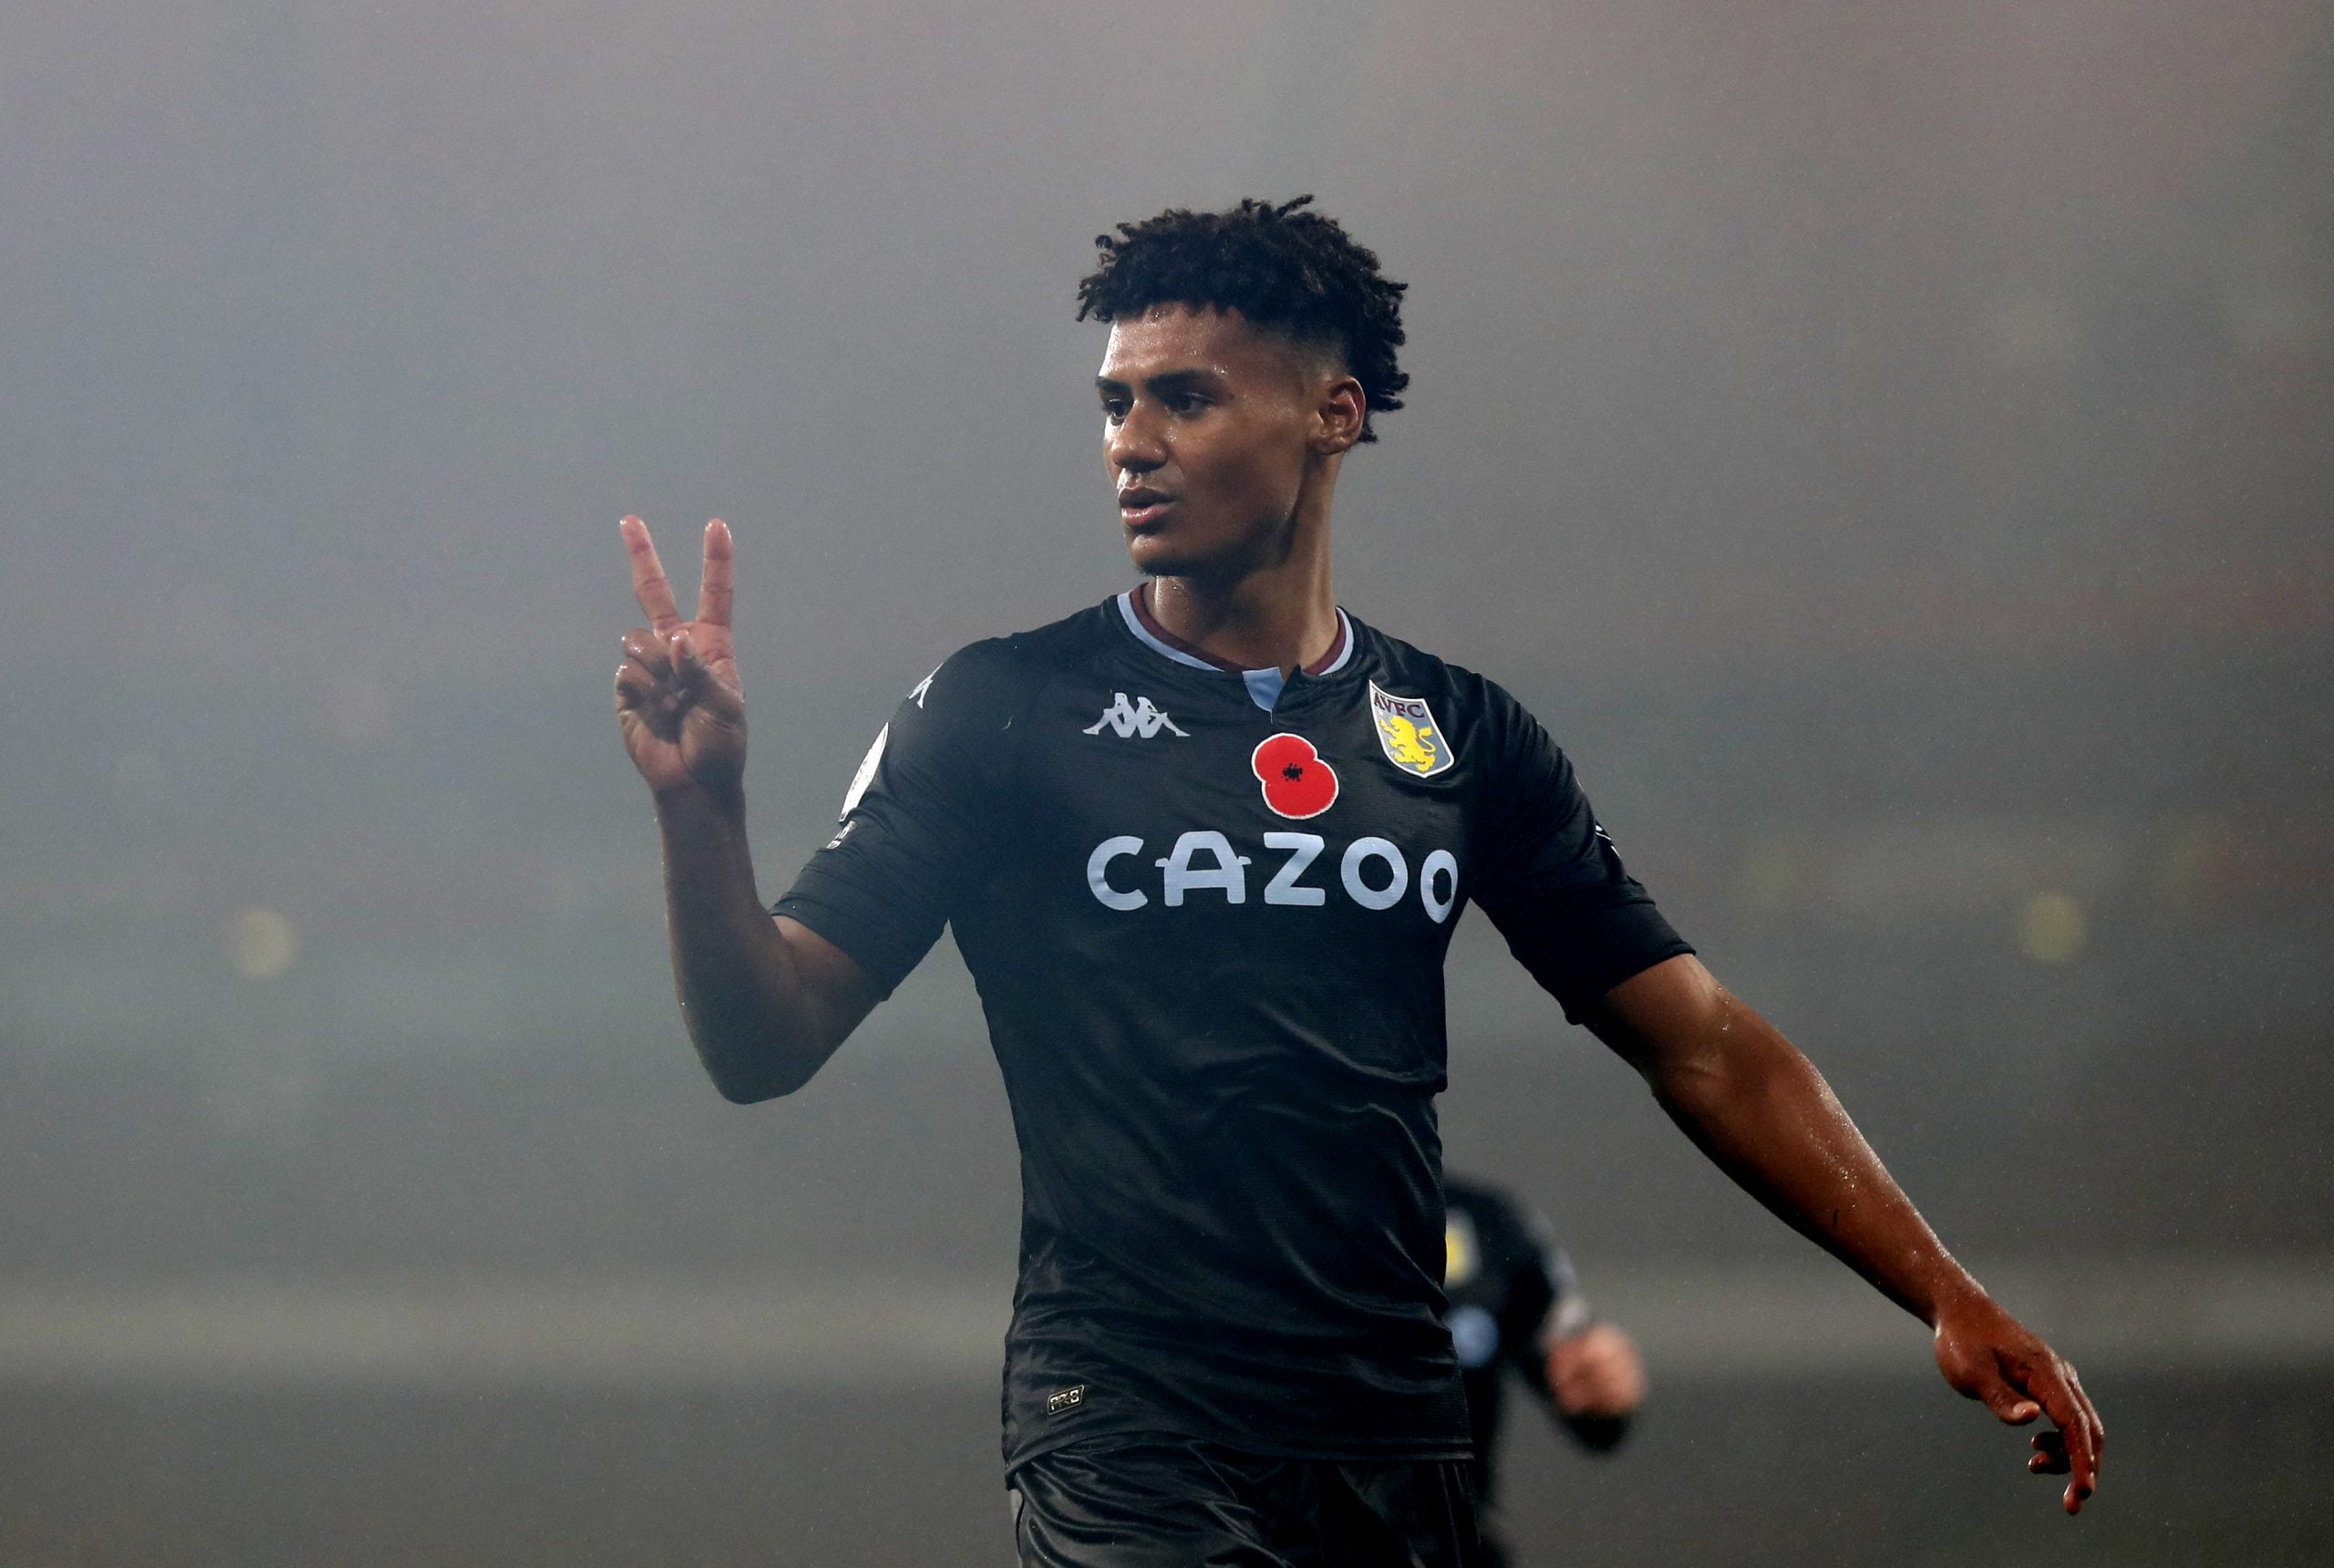 Ollie Watkins of Aston Villa celebrates after scoring his team's third goal during the Premier League match between Arsenal and Aston Villa at Emirates Stadium on November 08, 2020 in London, England. (Photo by Alastair Grant - Pool/Getty Images)